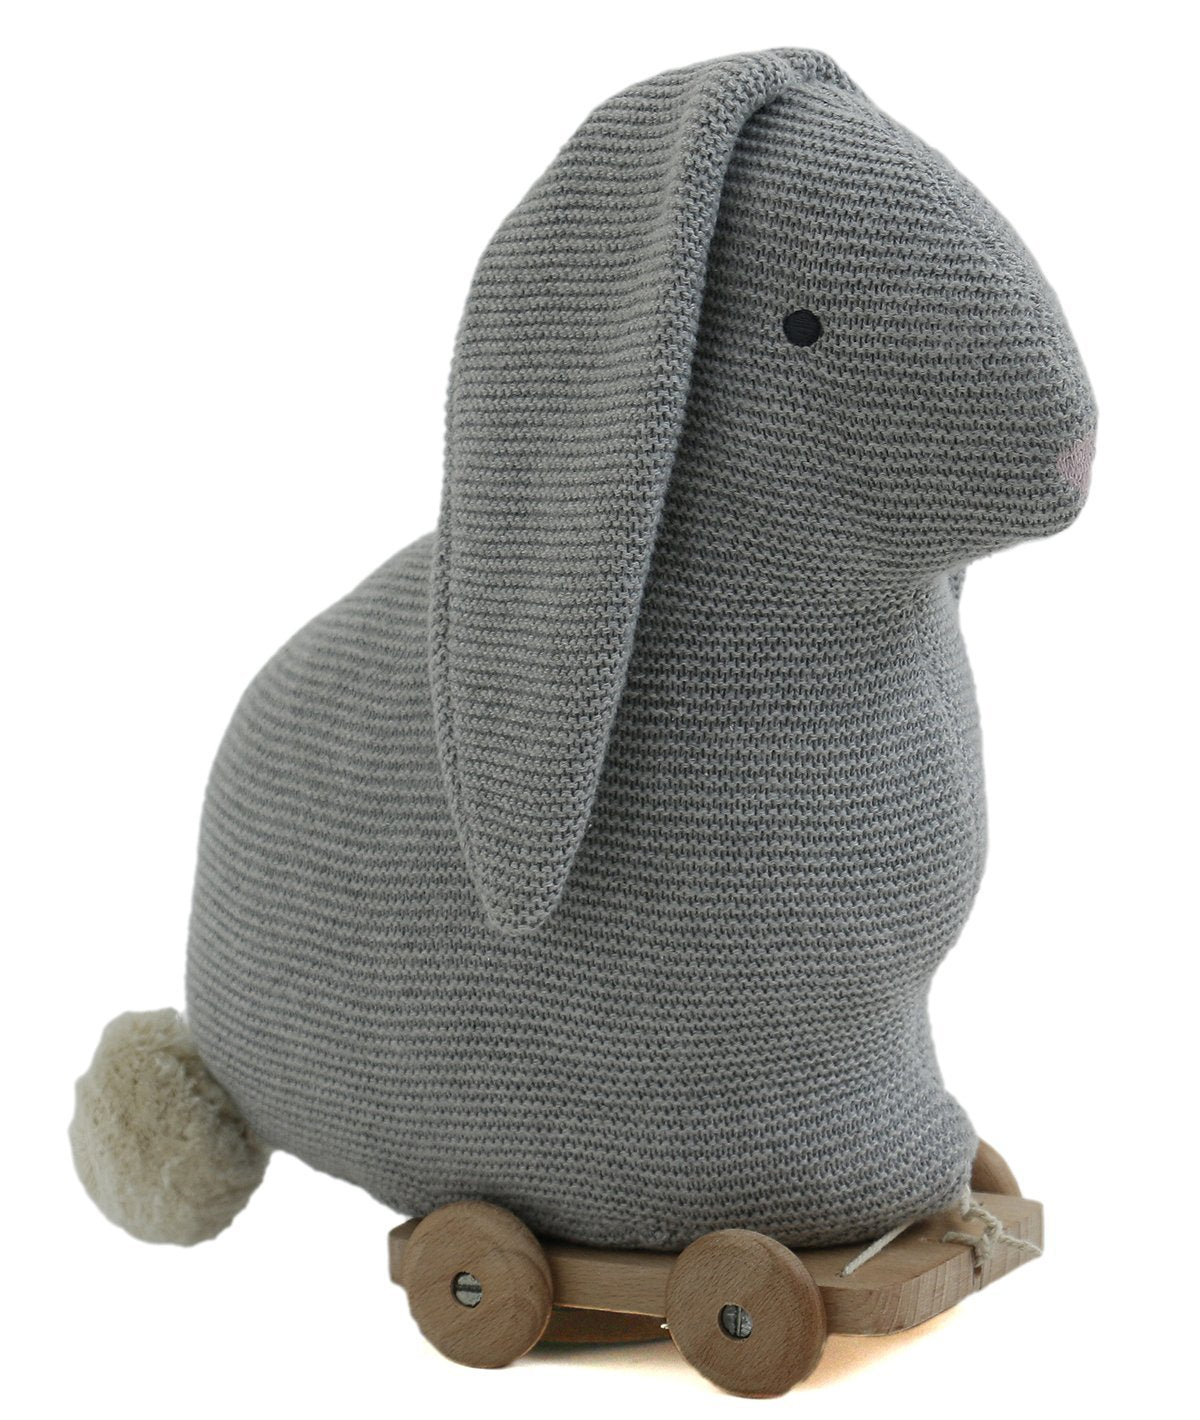 Push & Pull Bunny - Grey 100% Cotton Knitted Stuffed Soft Toy for Babies / Kids with Wooden Cart